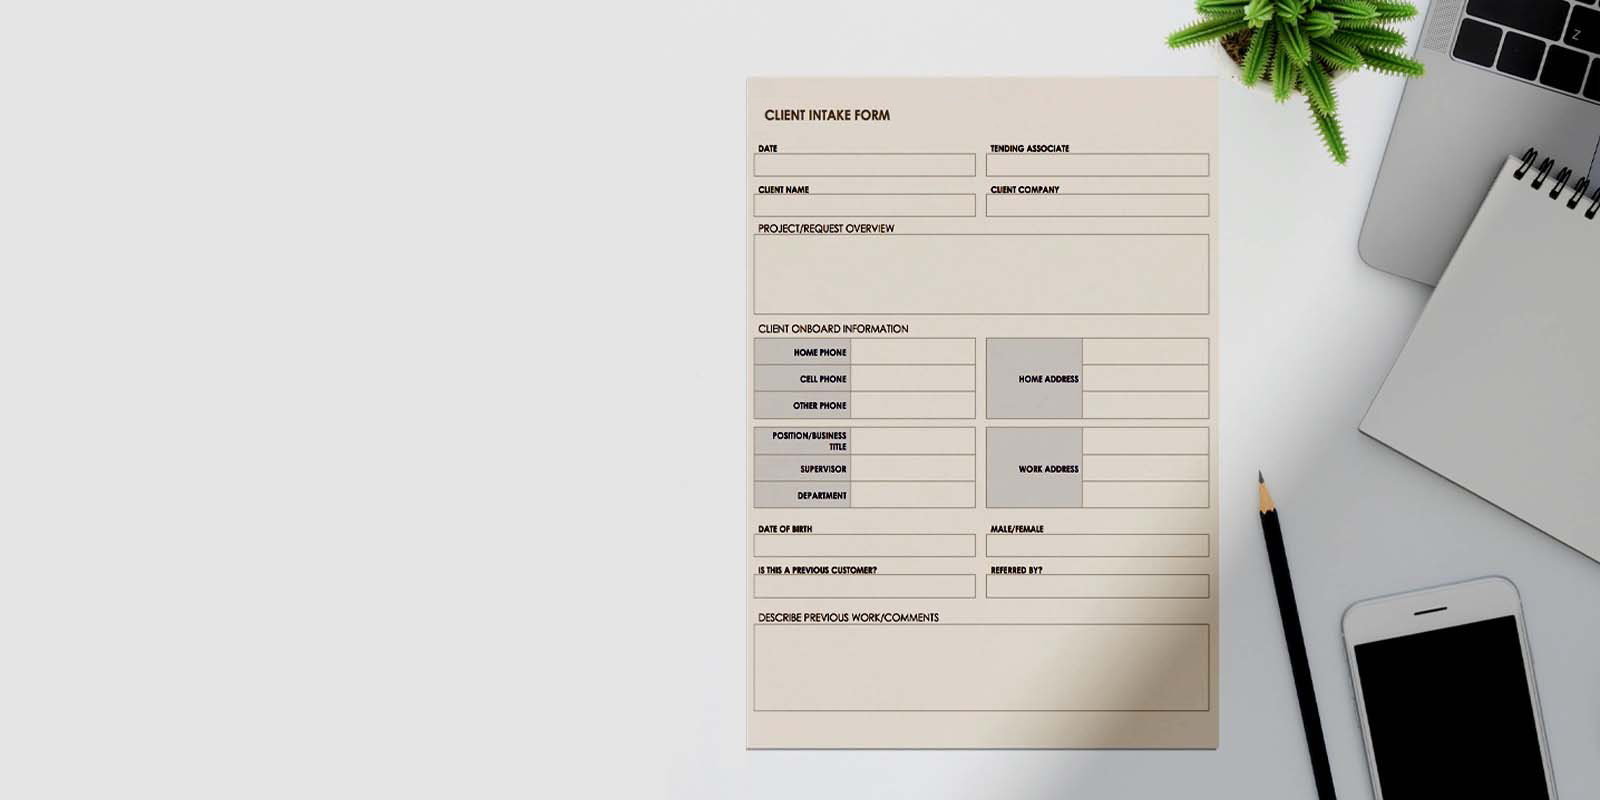 ECO business forms in Canberra - Print with Pagerr